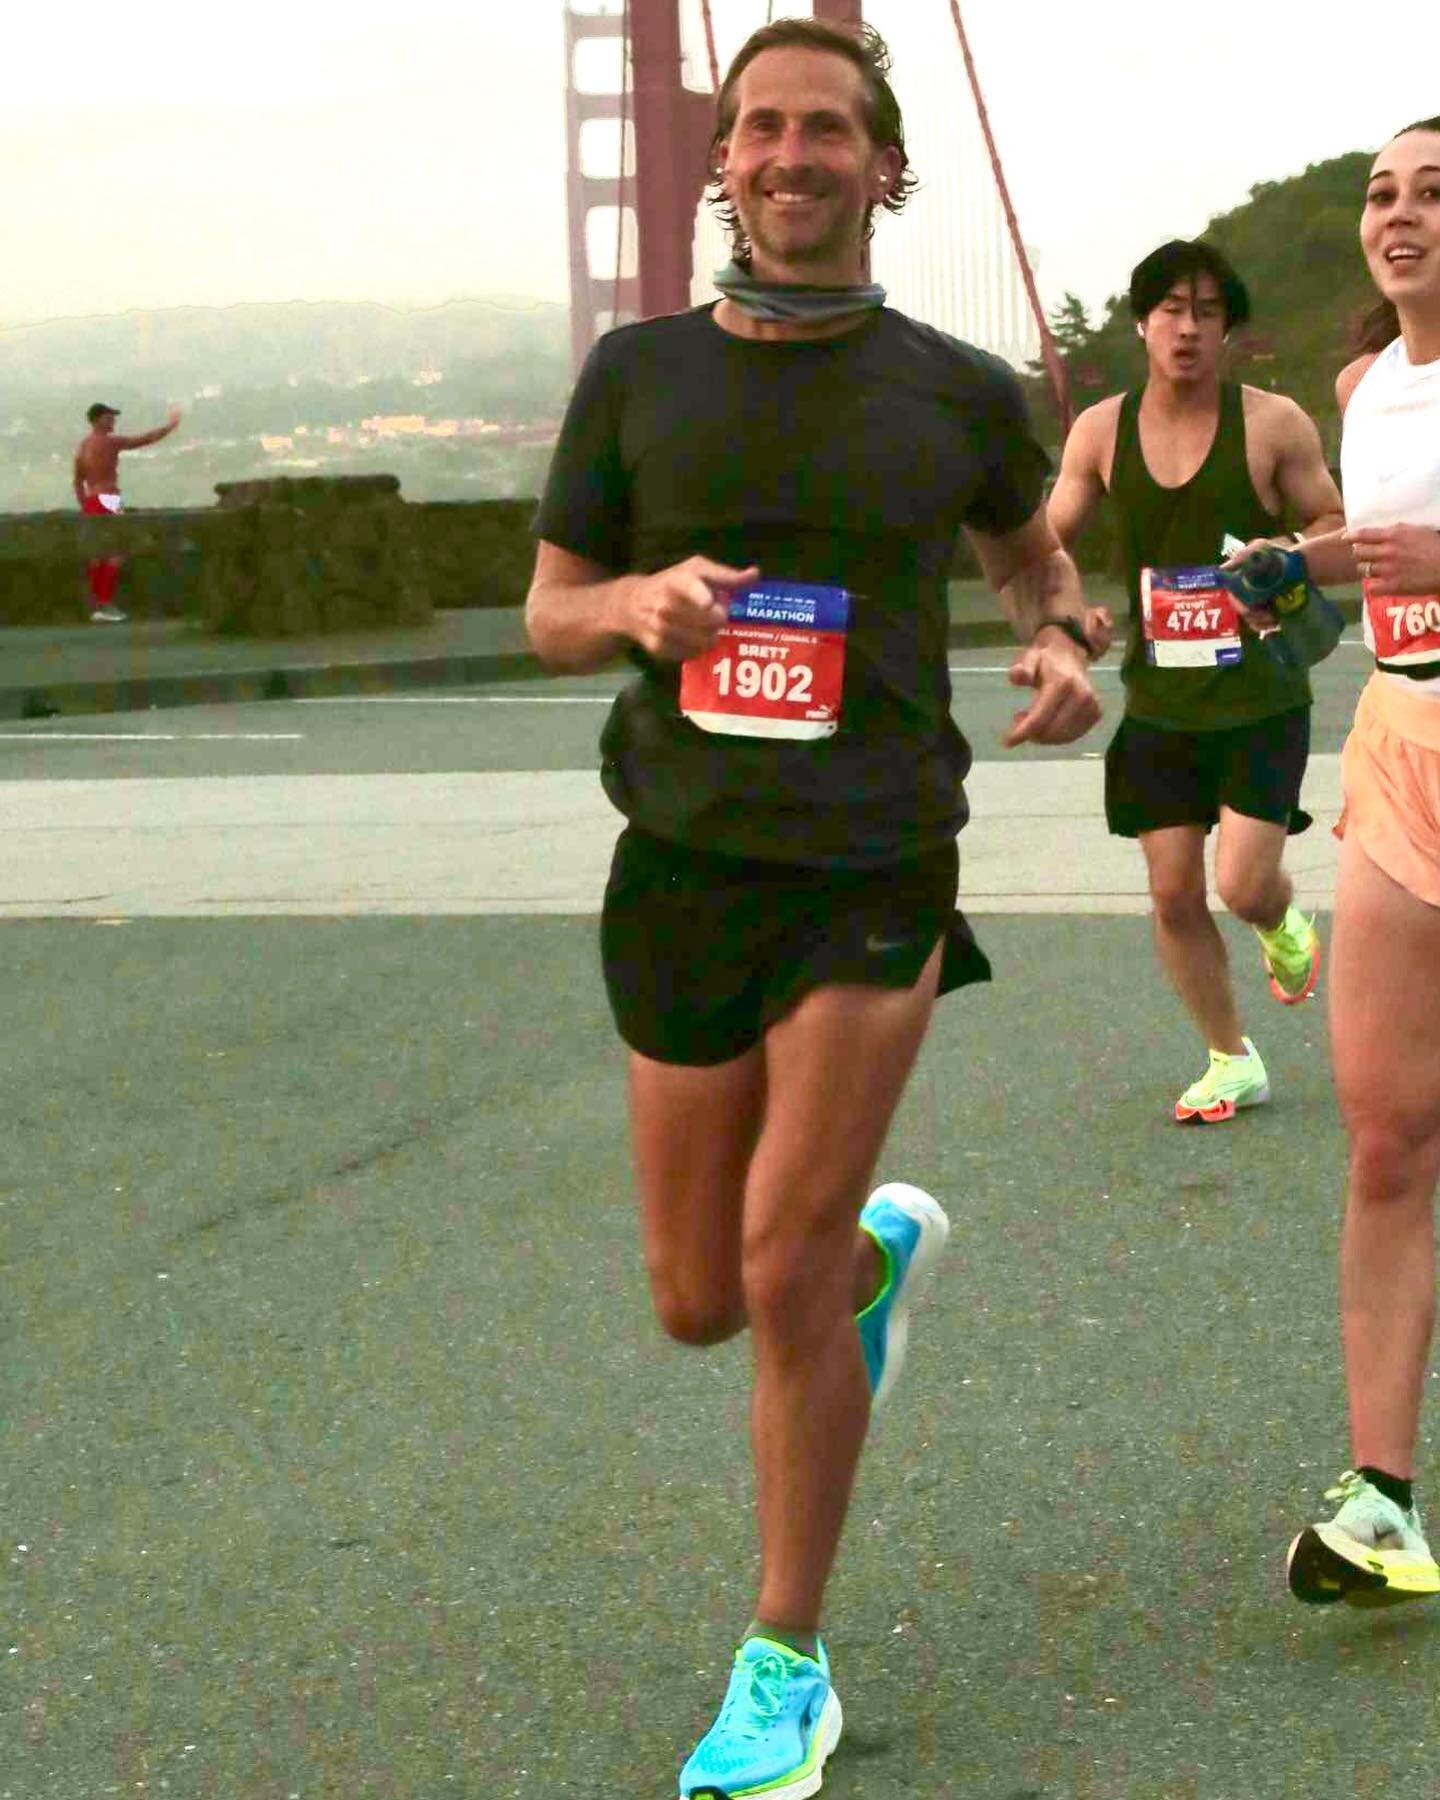 I love this race. It&rsquo;s everything that&rsquo;s great about SF and living in runner&rsquo;s paradise, the weather, the hills, the beauty, this city. Super thankful to participate and for everyone that made it happen. 3:38:55 not to shabby for no